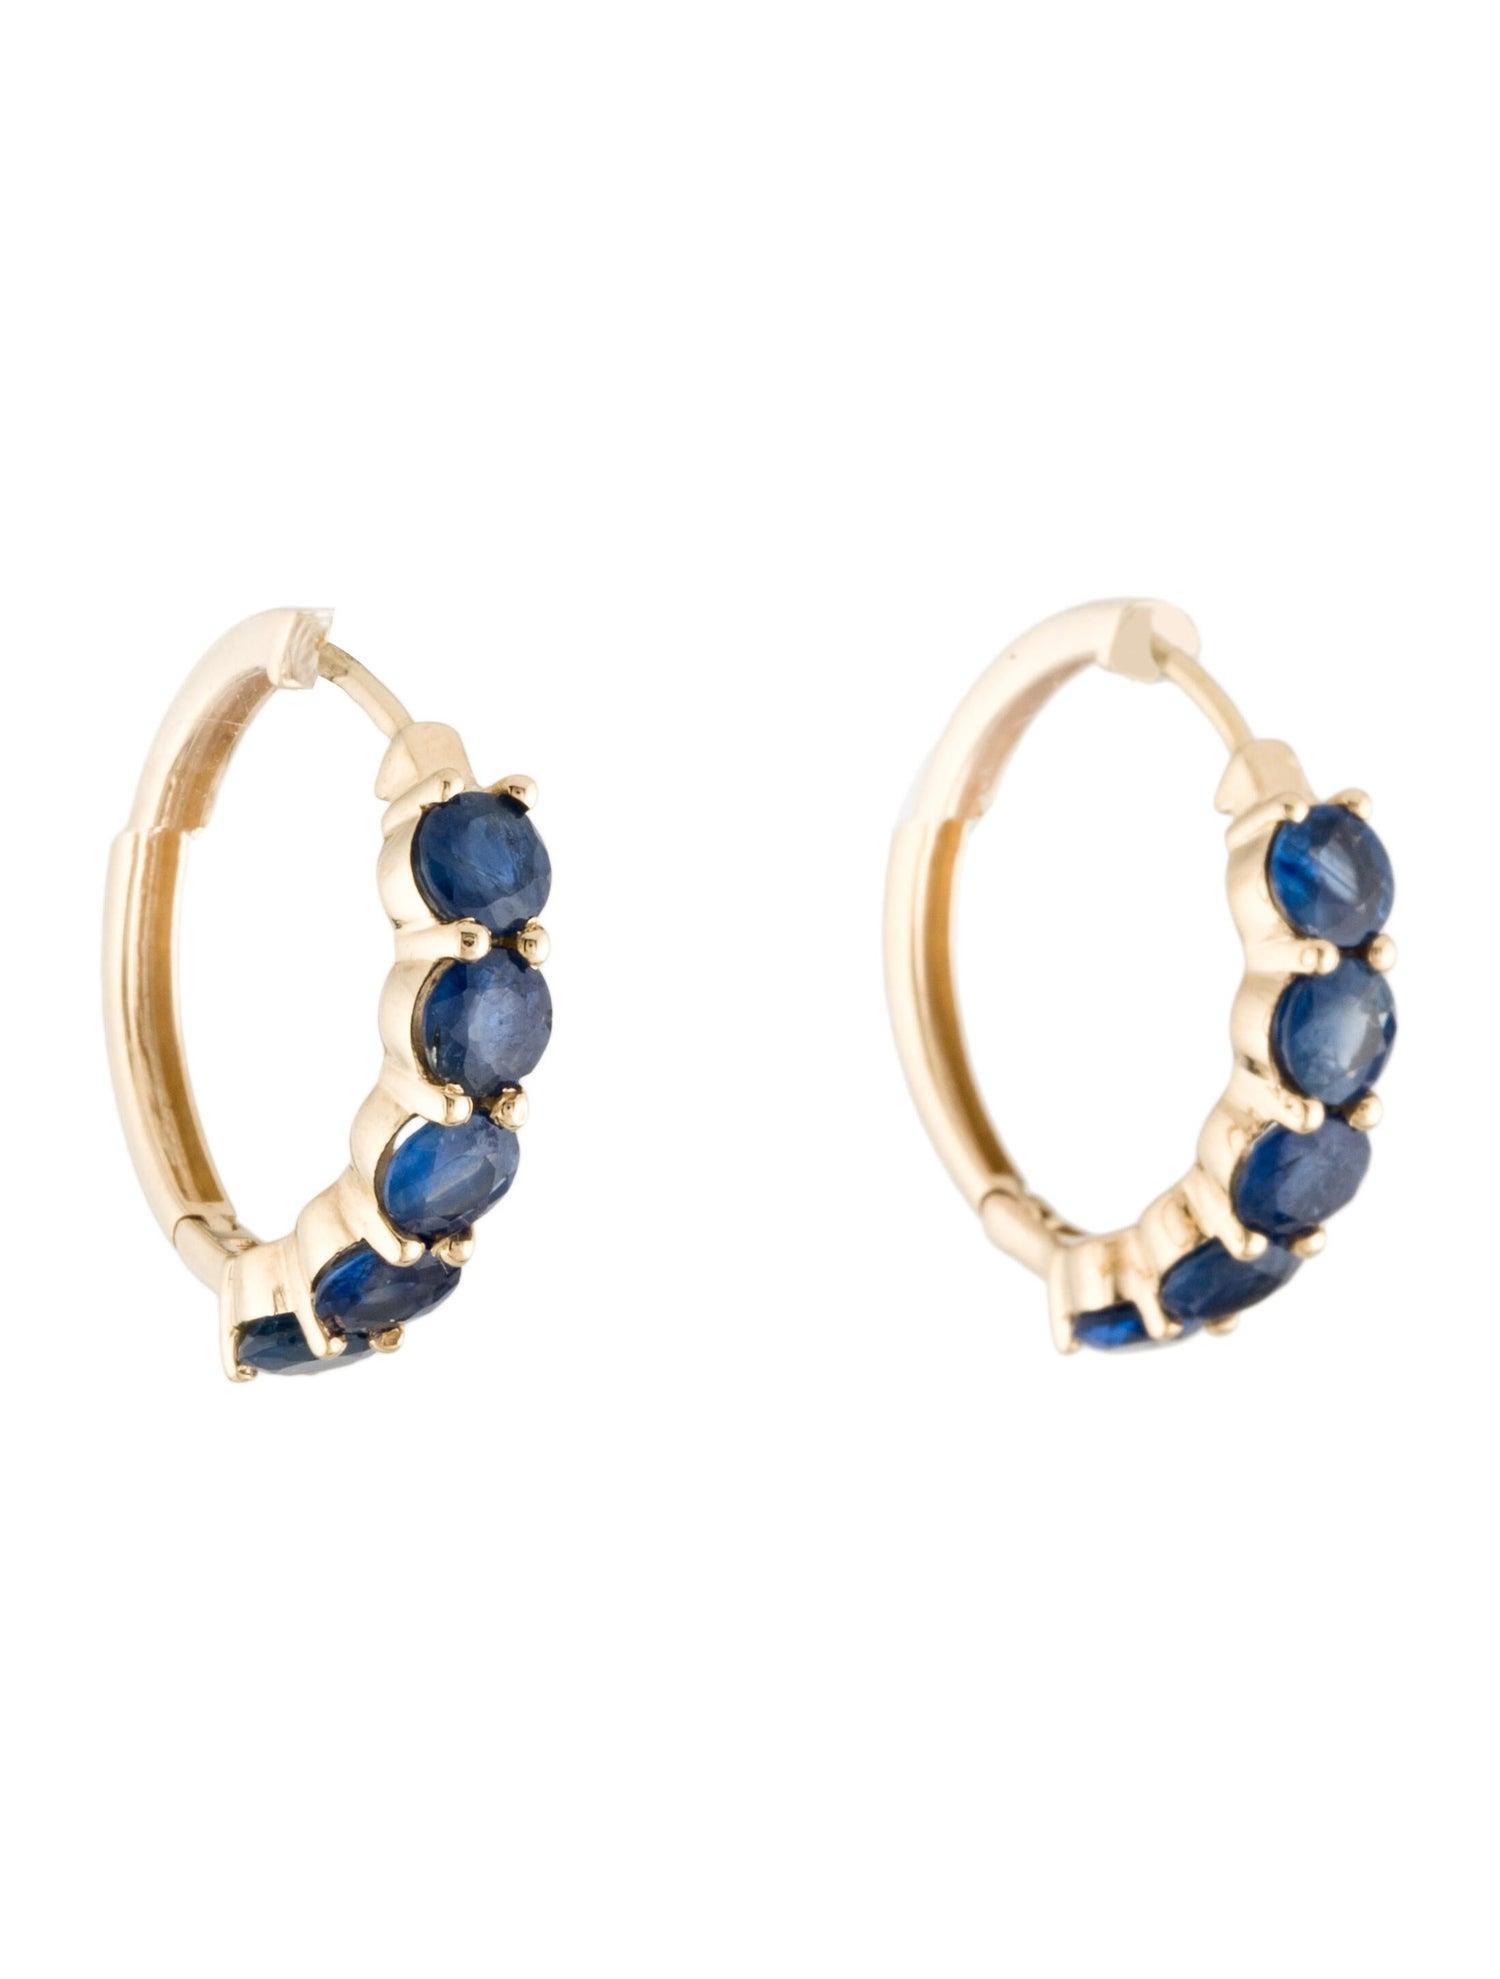 Discover the allure of sophistication and timeless elegance with our 14K Yellow Gold Sapphire Hoop Earrings. These exquisite hoops are meticulously crafted to highlight the lustrous beauty of faceted round sapphires, totaling a remarkable 3.00